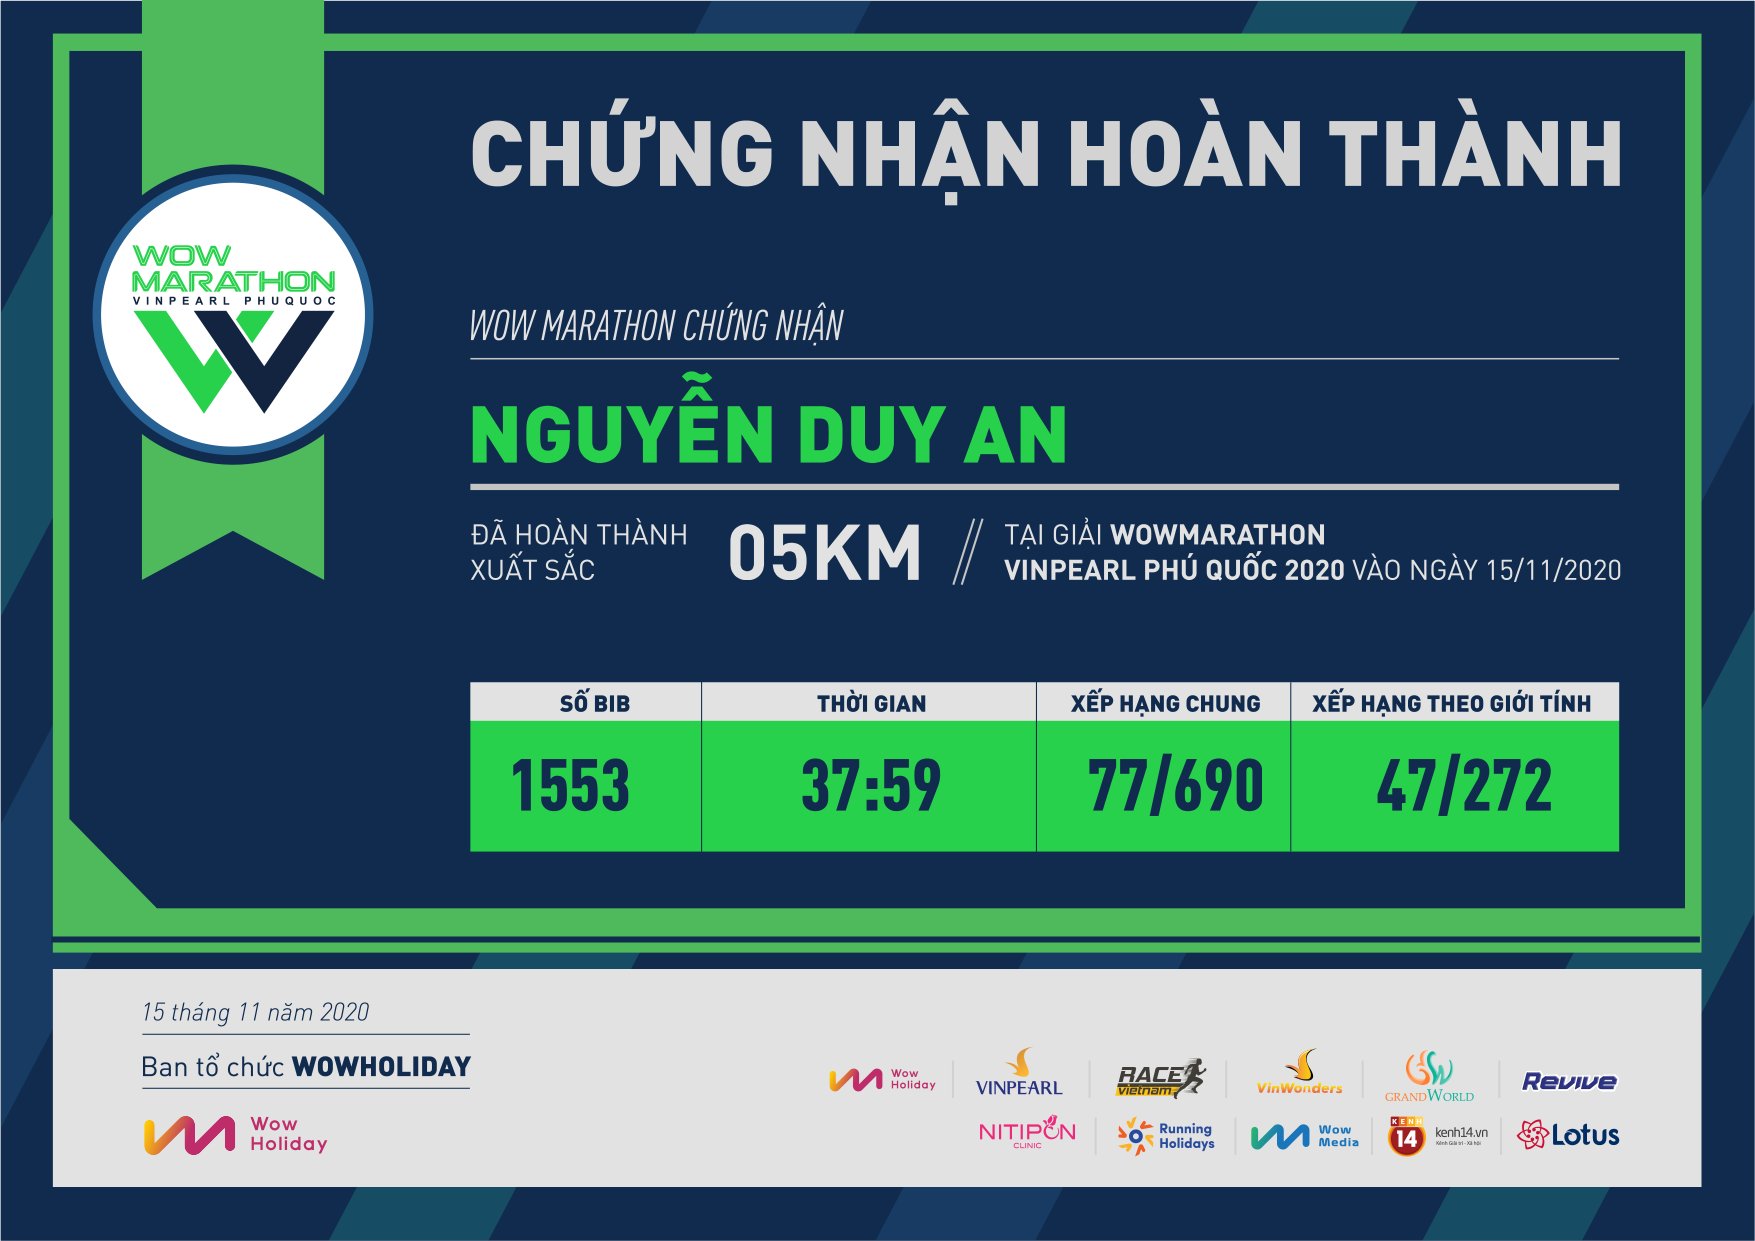 1553 - Nguyễn Duy An